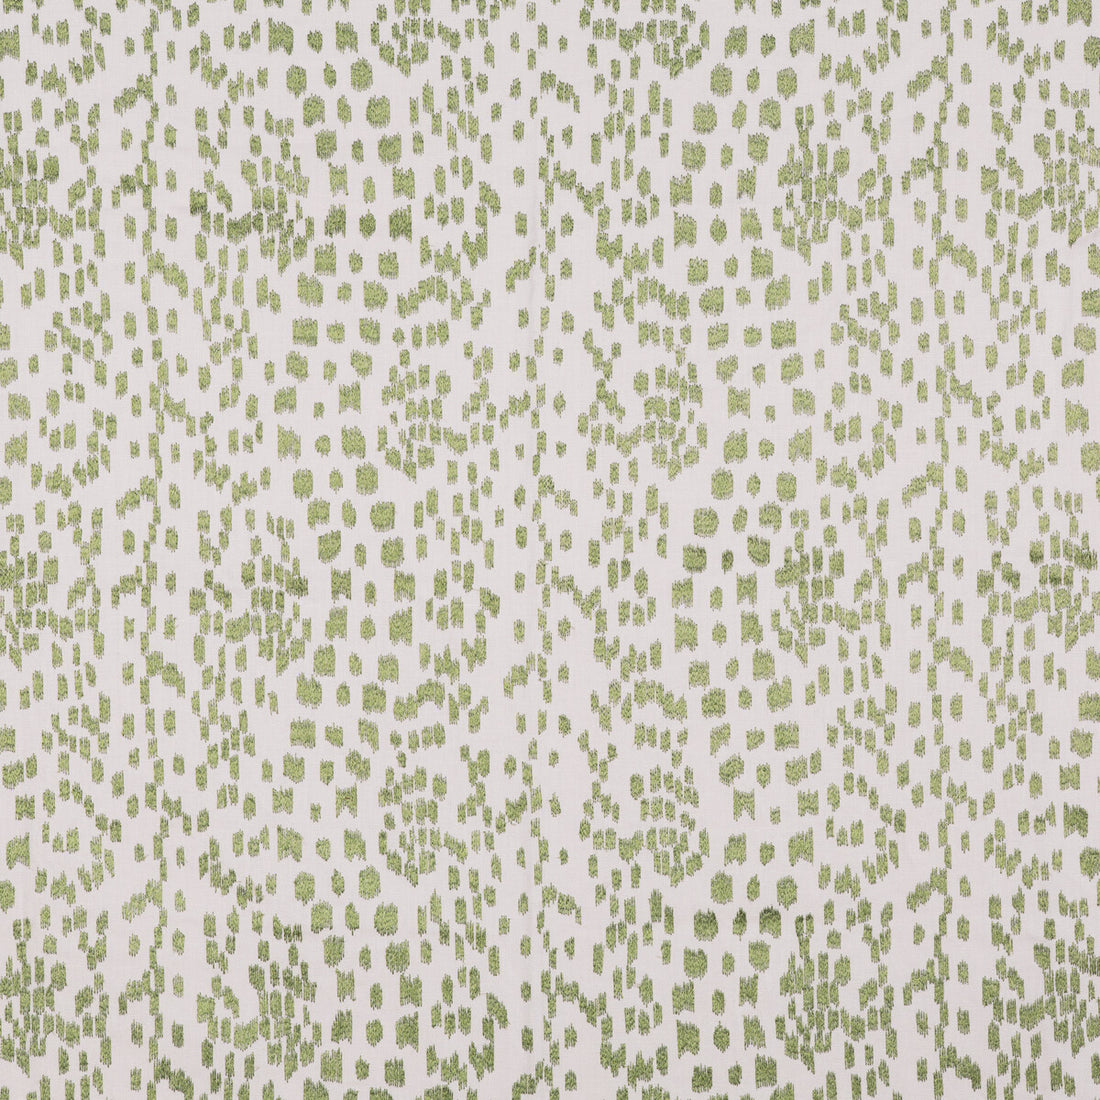 Les Touches Emb fabric in leaf color - pattern 8015168.3.0 - by Brunschwig &amp; Fils in the Cape Comorin collection